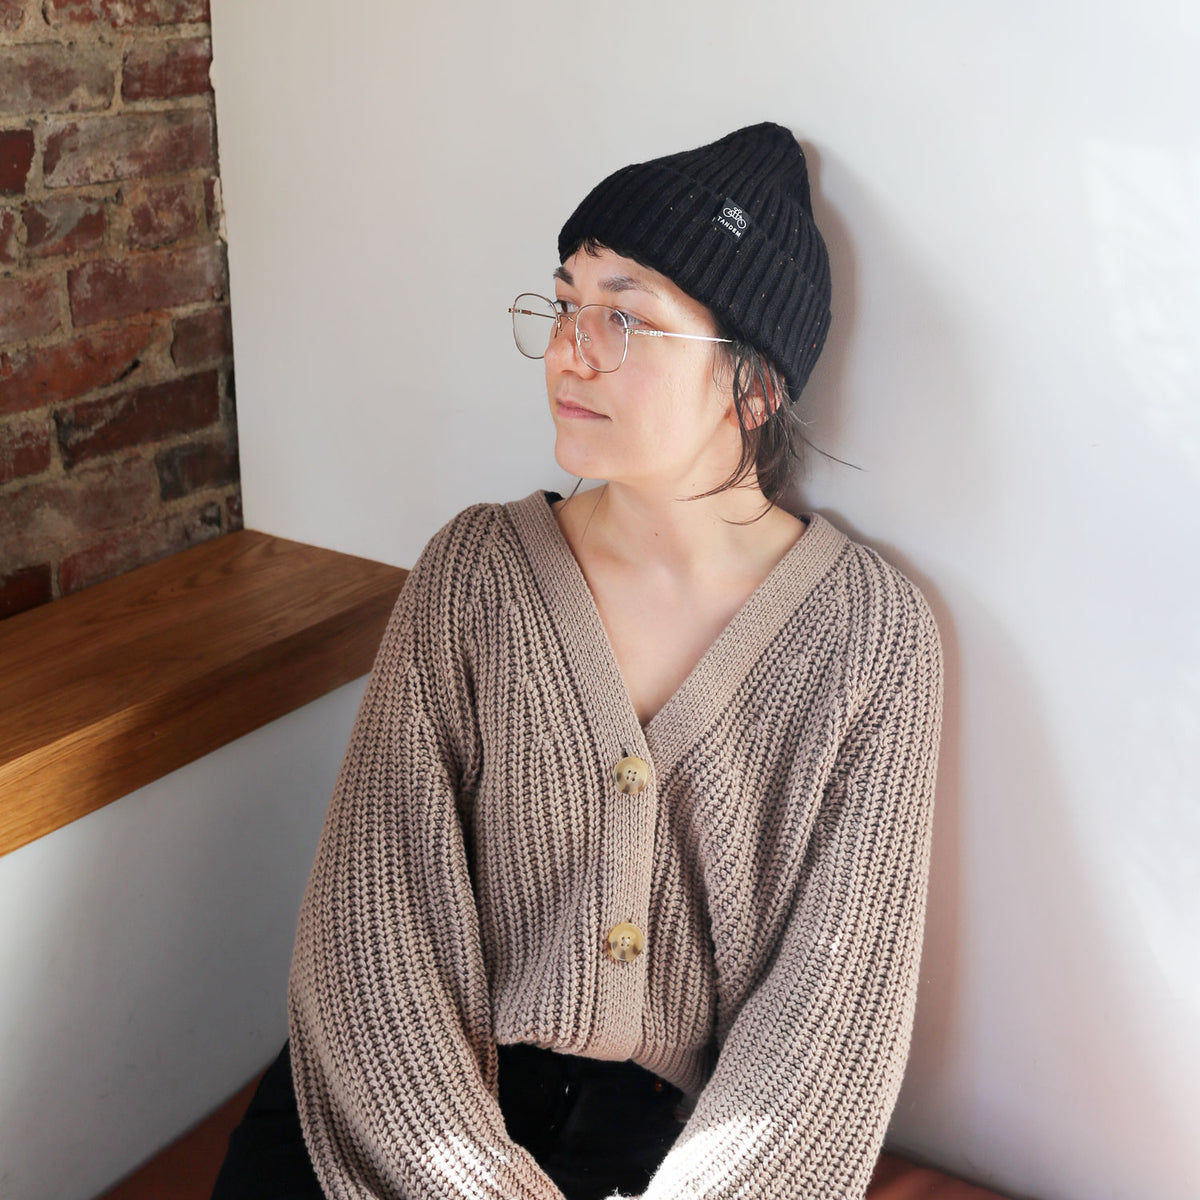 A woman wearing a black Tandem Coffee Roasters merino wool beanie and glasses sits at a wooden table against a brick wall background, looking to her right with a thoughtful expression. She's dressed in a chunky knit.